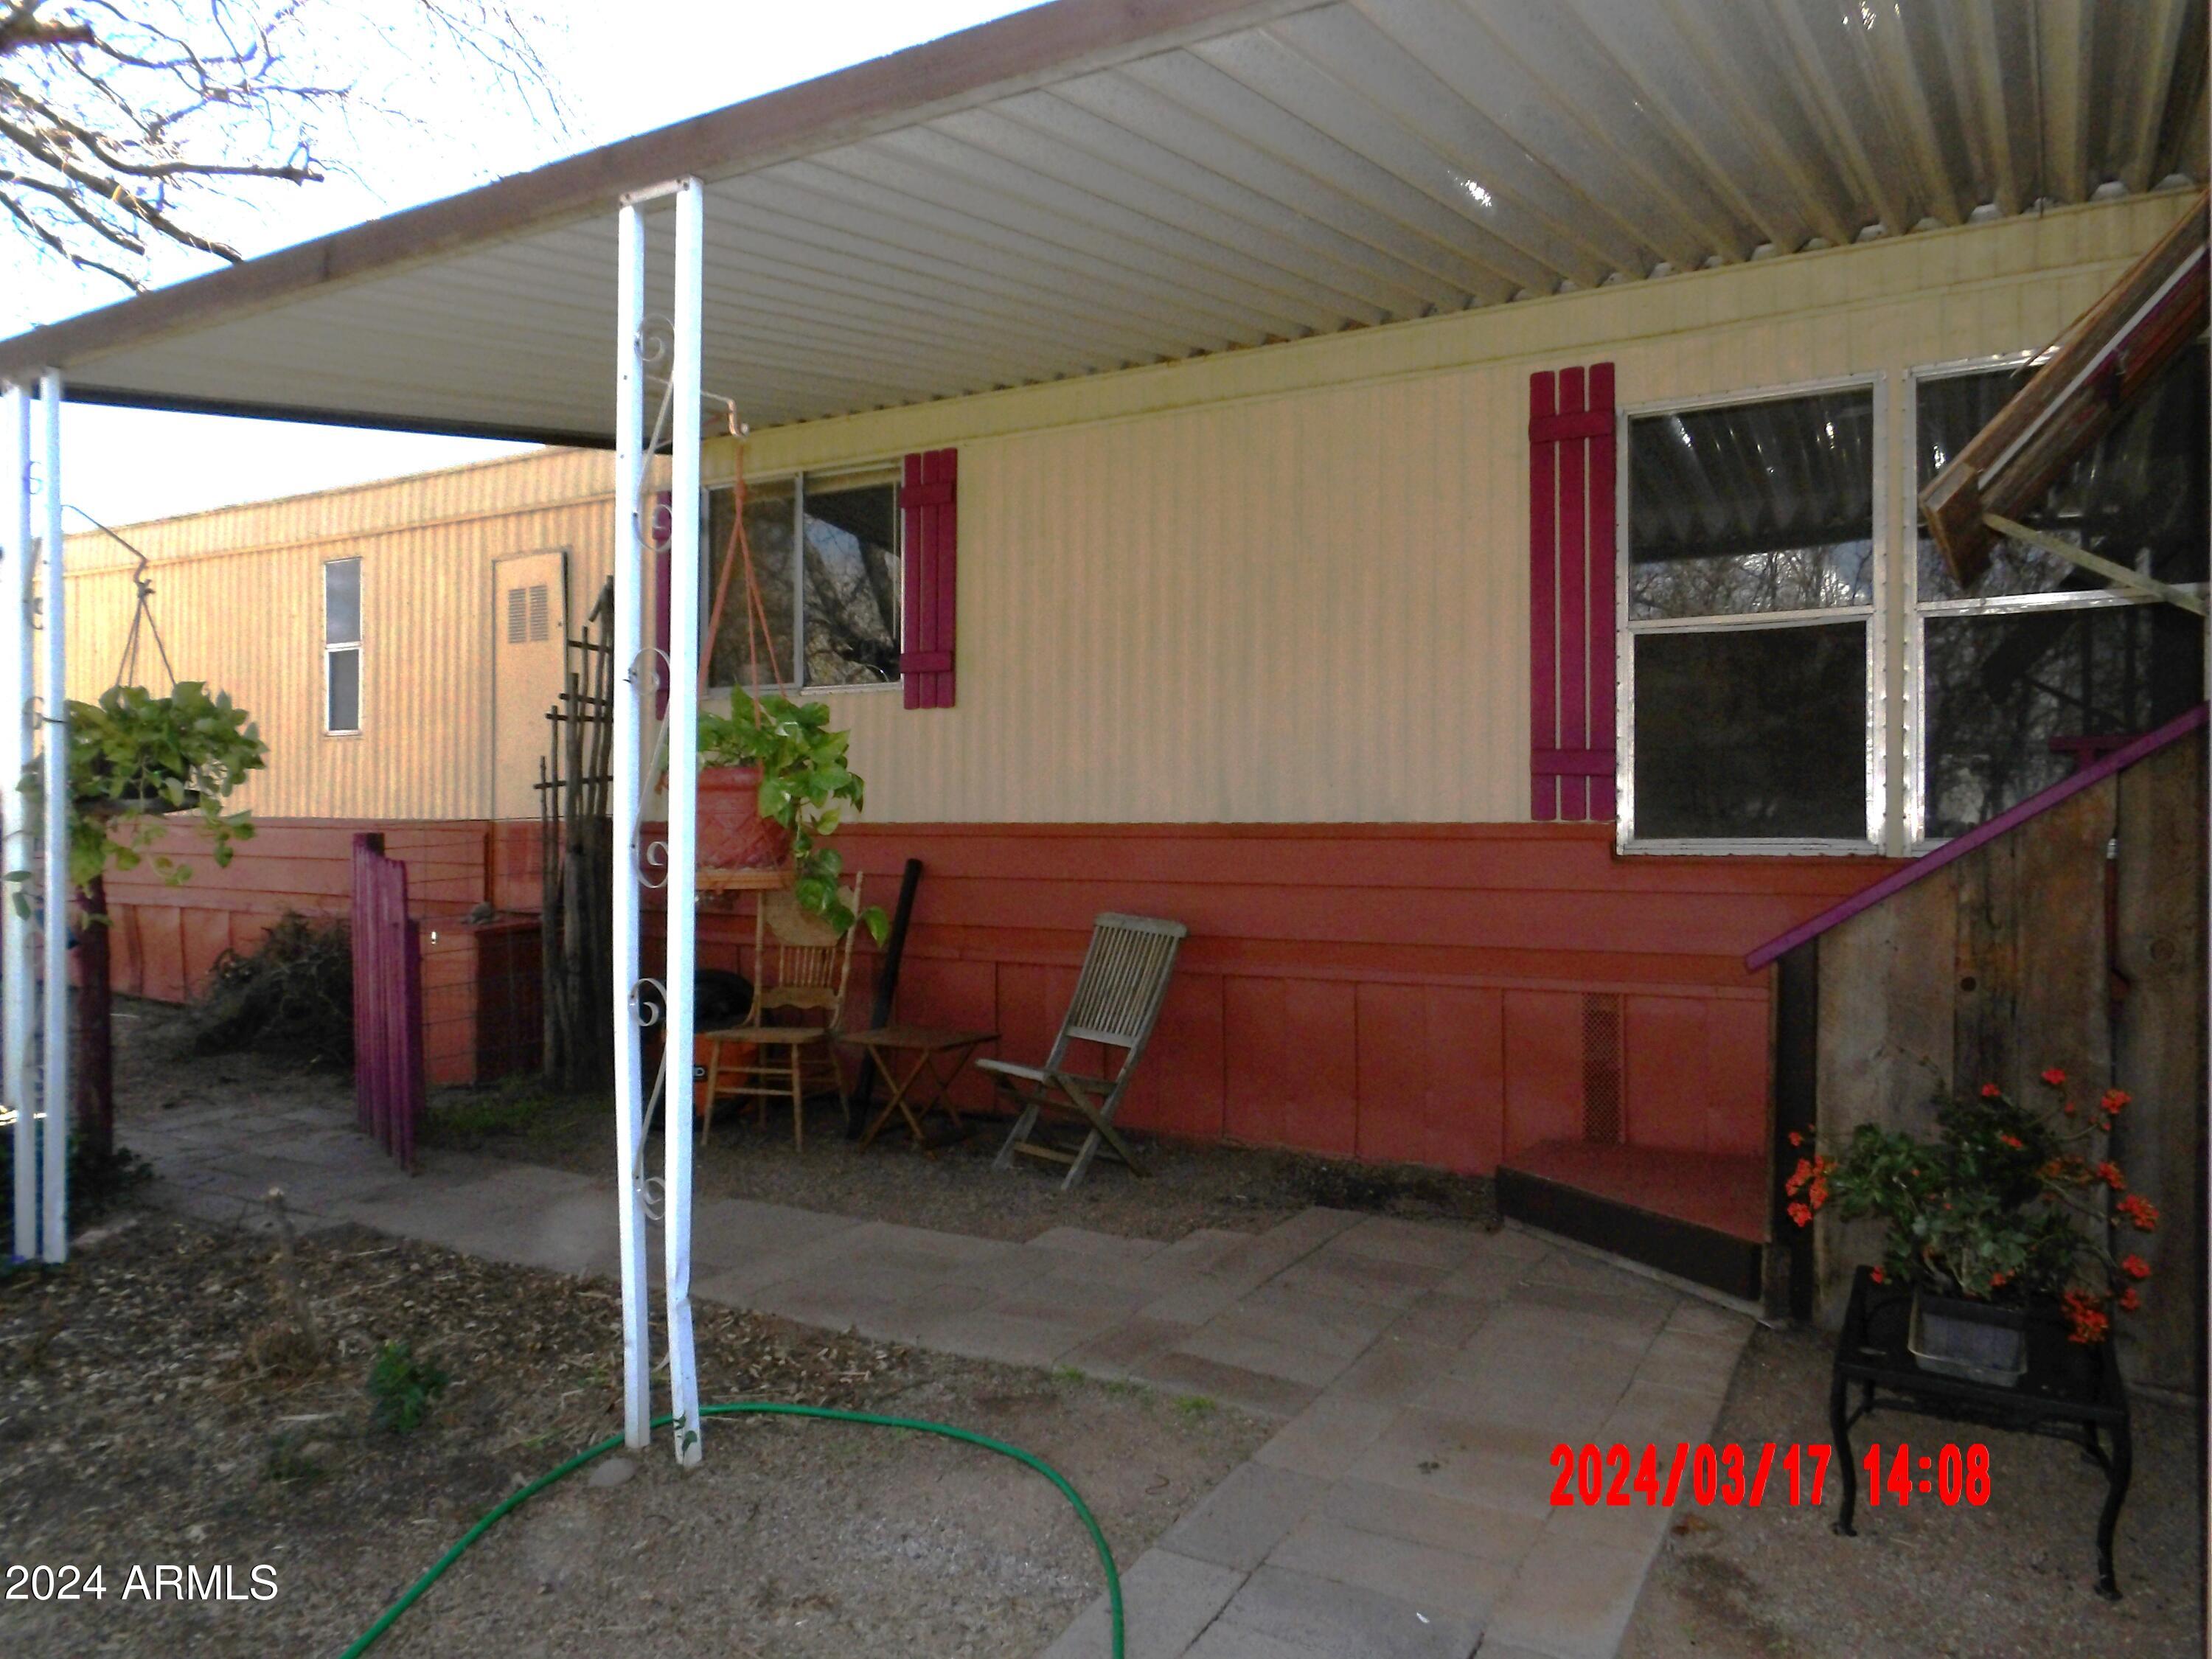 Photo 6 of 25 of 110 N CHEROKEE Trail mobile home